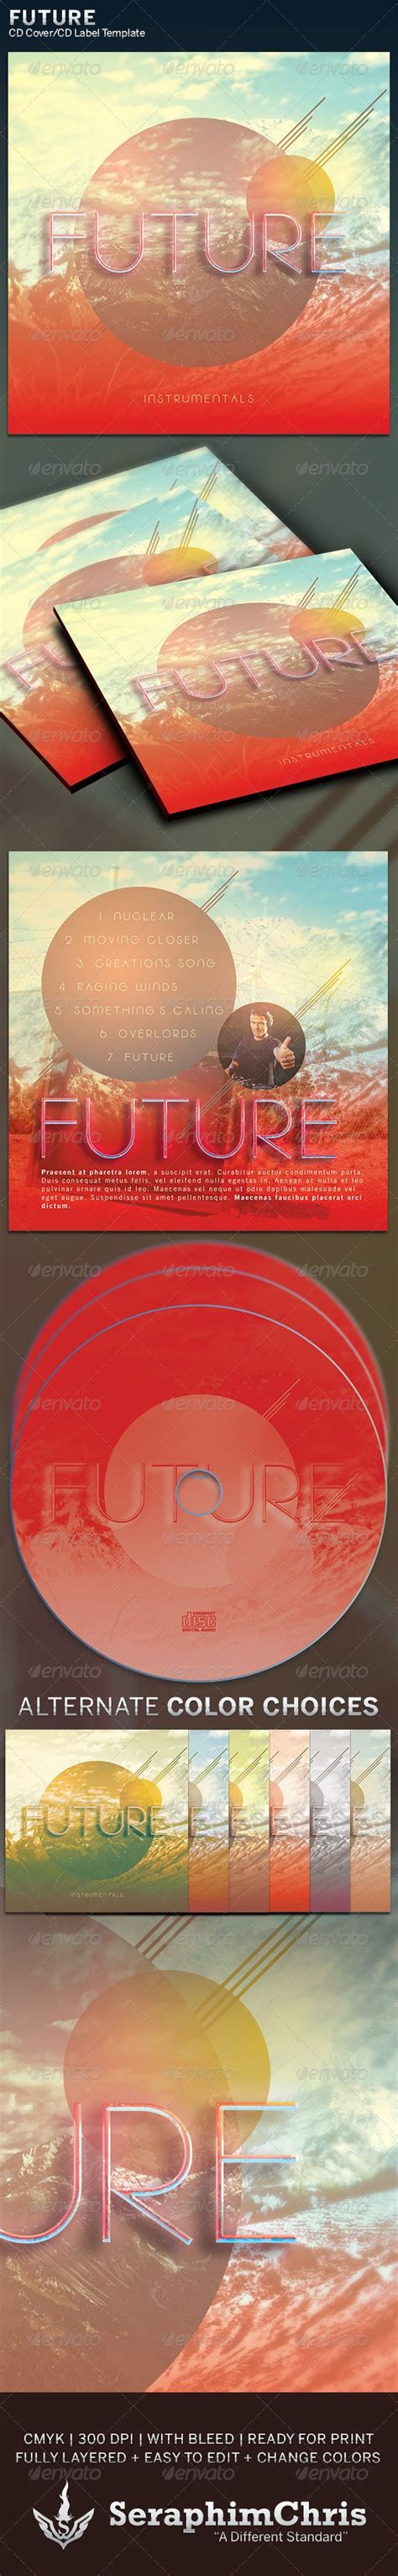 Future Cd Cover Artwork Template By Seraphimchris Graphicriver